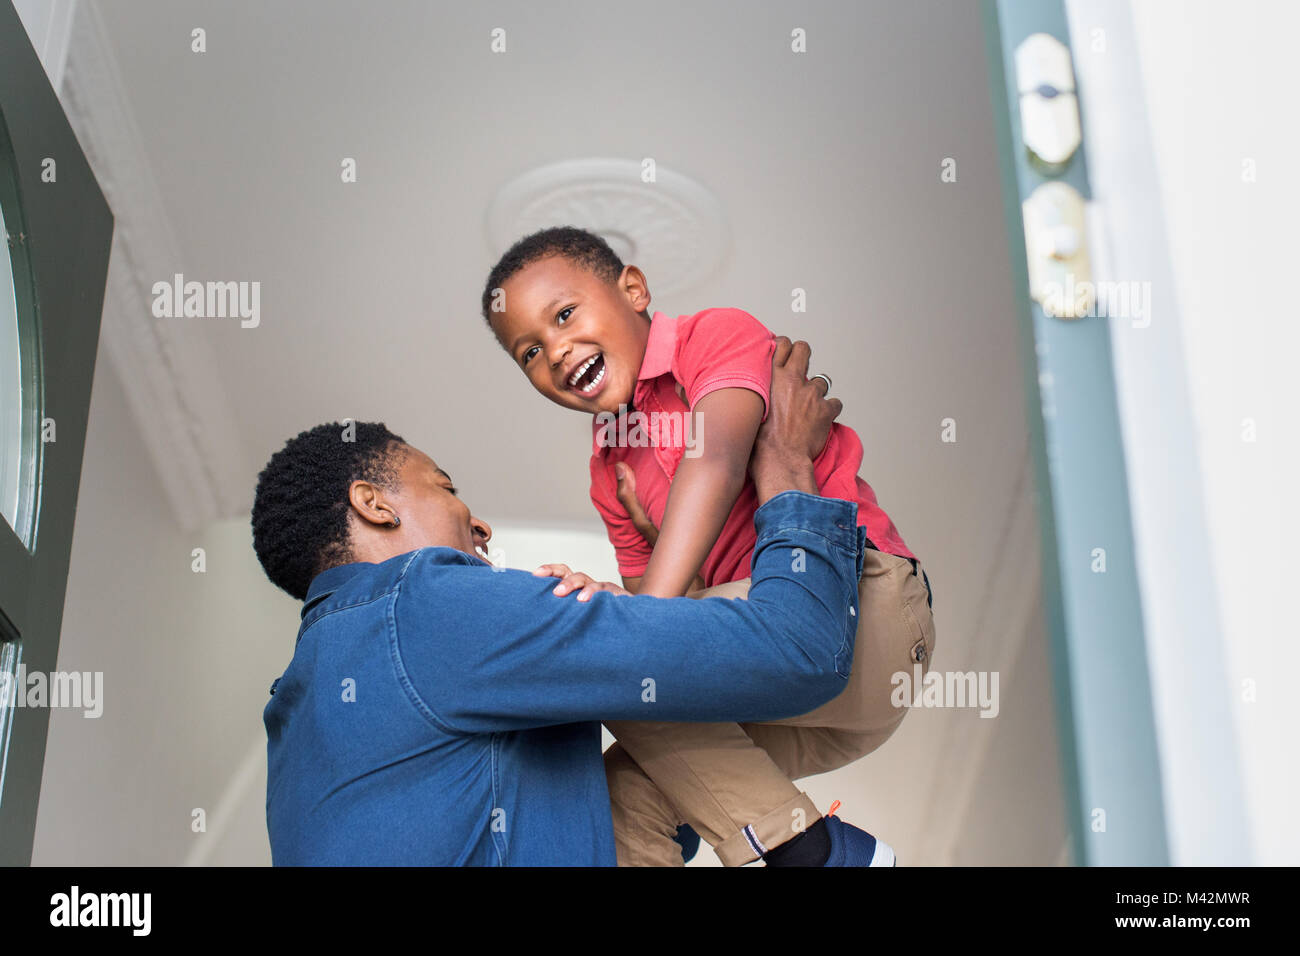 Dad lifting son up as he welcomes him home Stock Photo